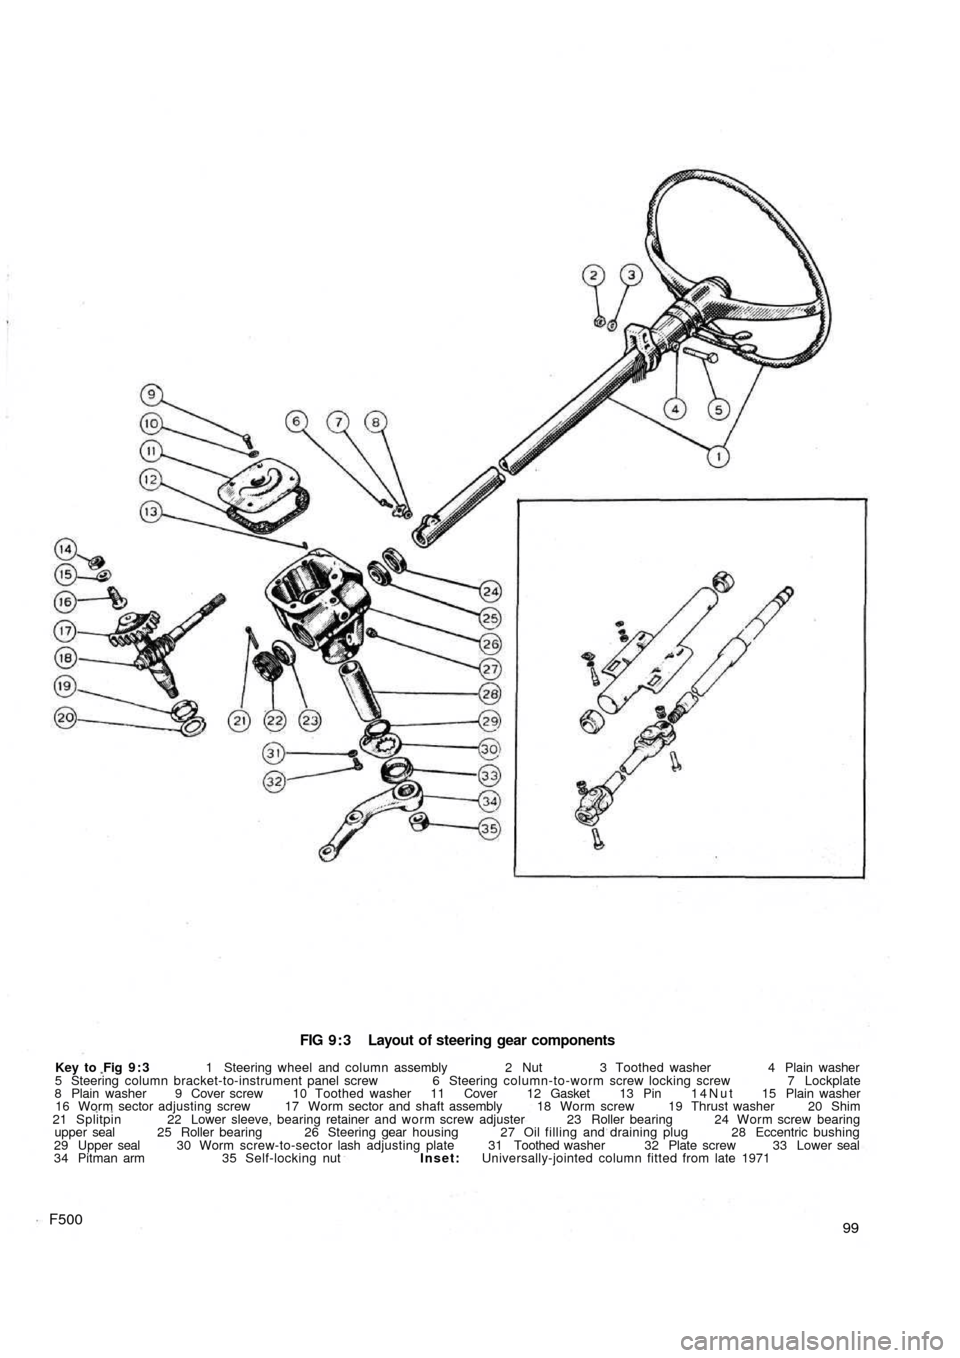 FIAT 500 1957 1.G Workshop Manual FIG 9 : 3  Layout of steering gear components
Key to  Fig 9 : 3 1 Steering wheel and column assembly 2 Nut 3 Toothed washer 4 Plain washer
5 Steering column bracket-to-instrument panel screw 6 Steerin